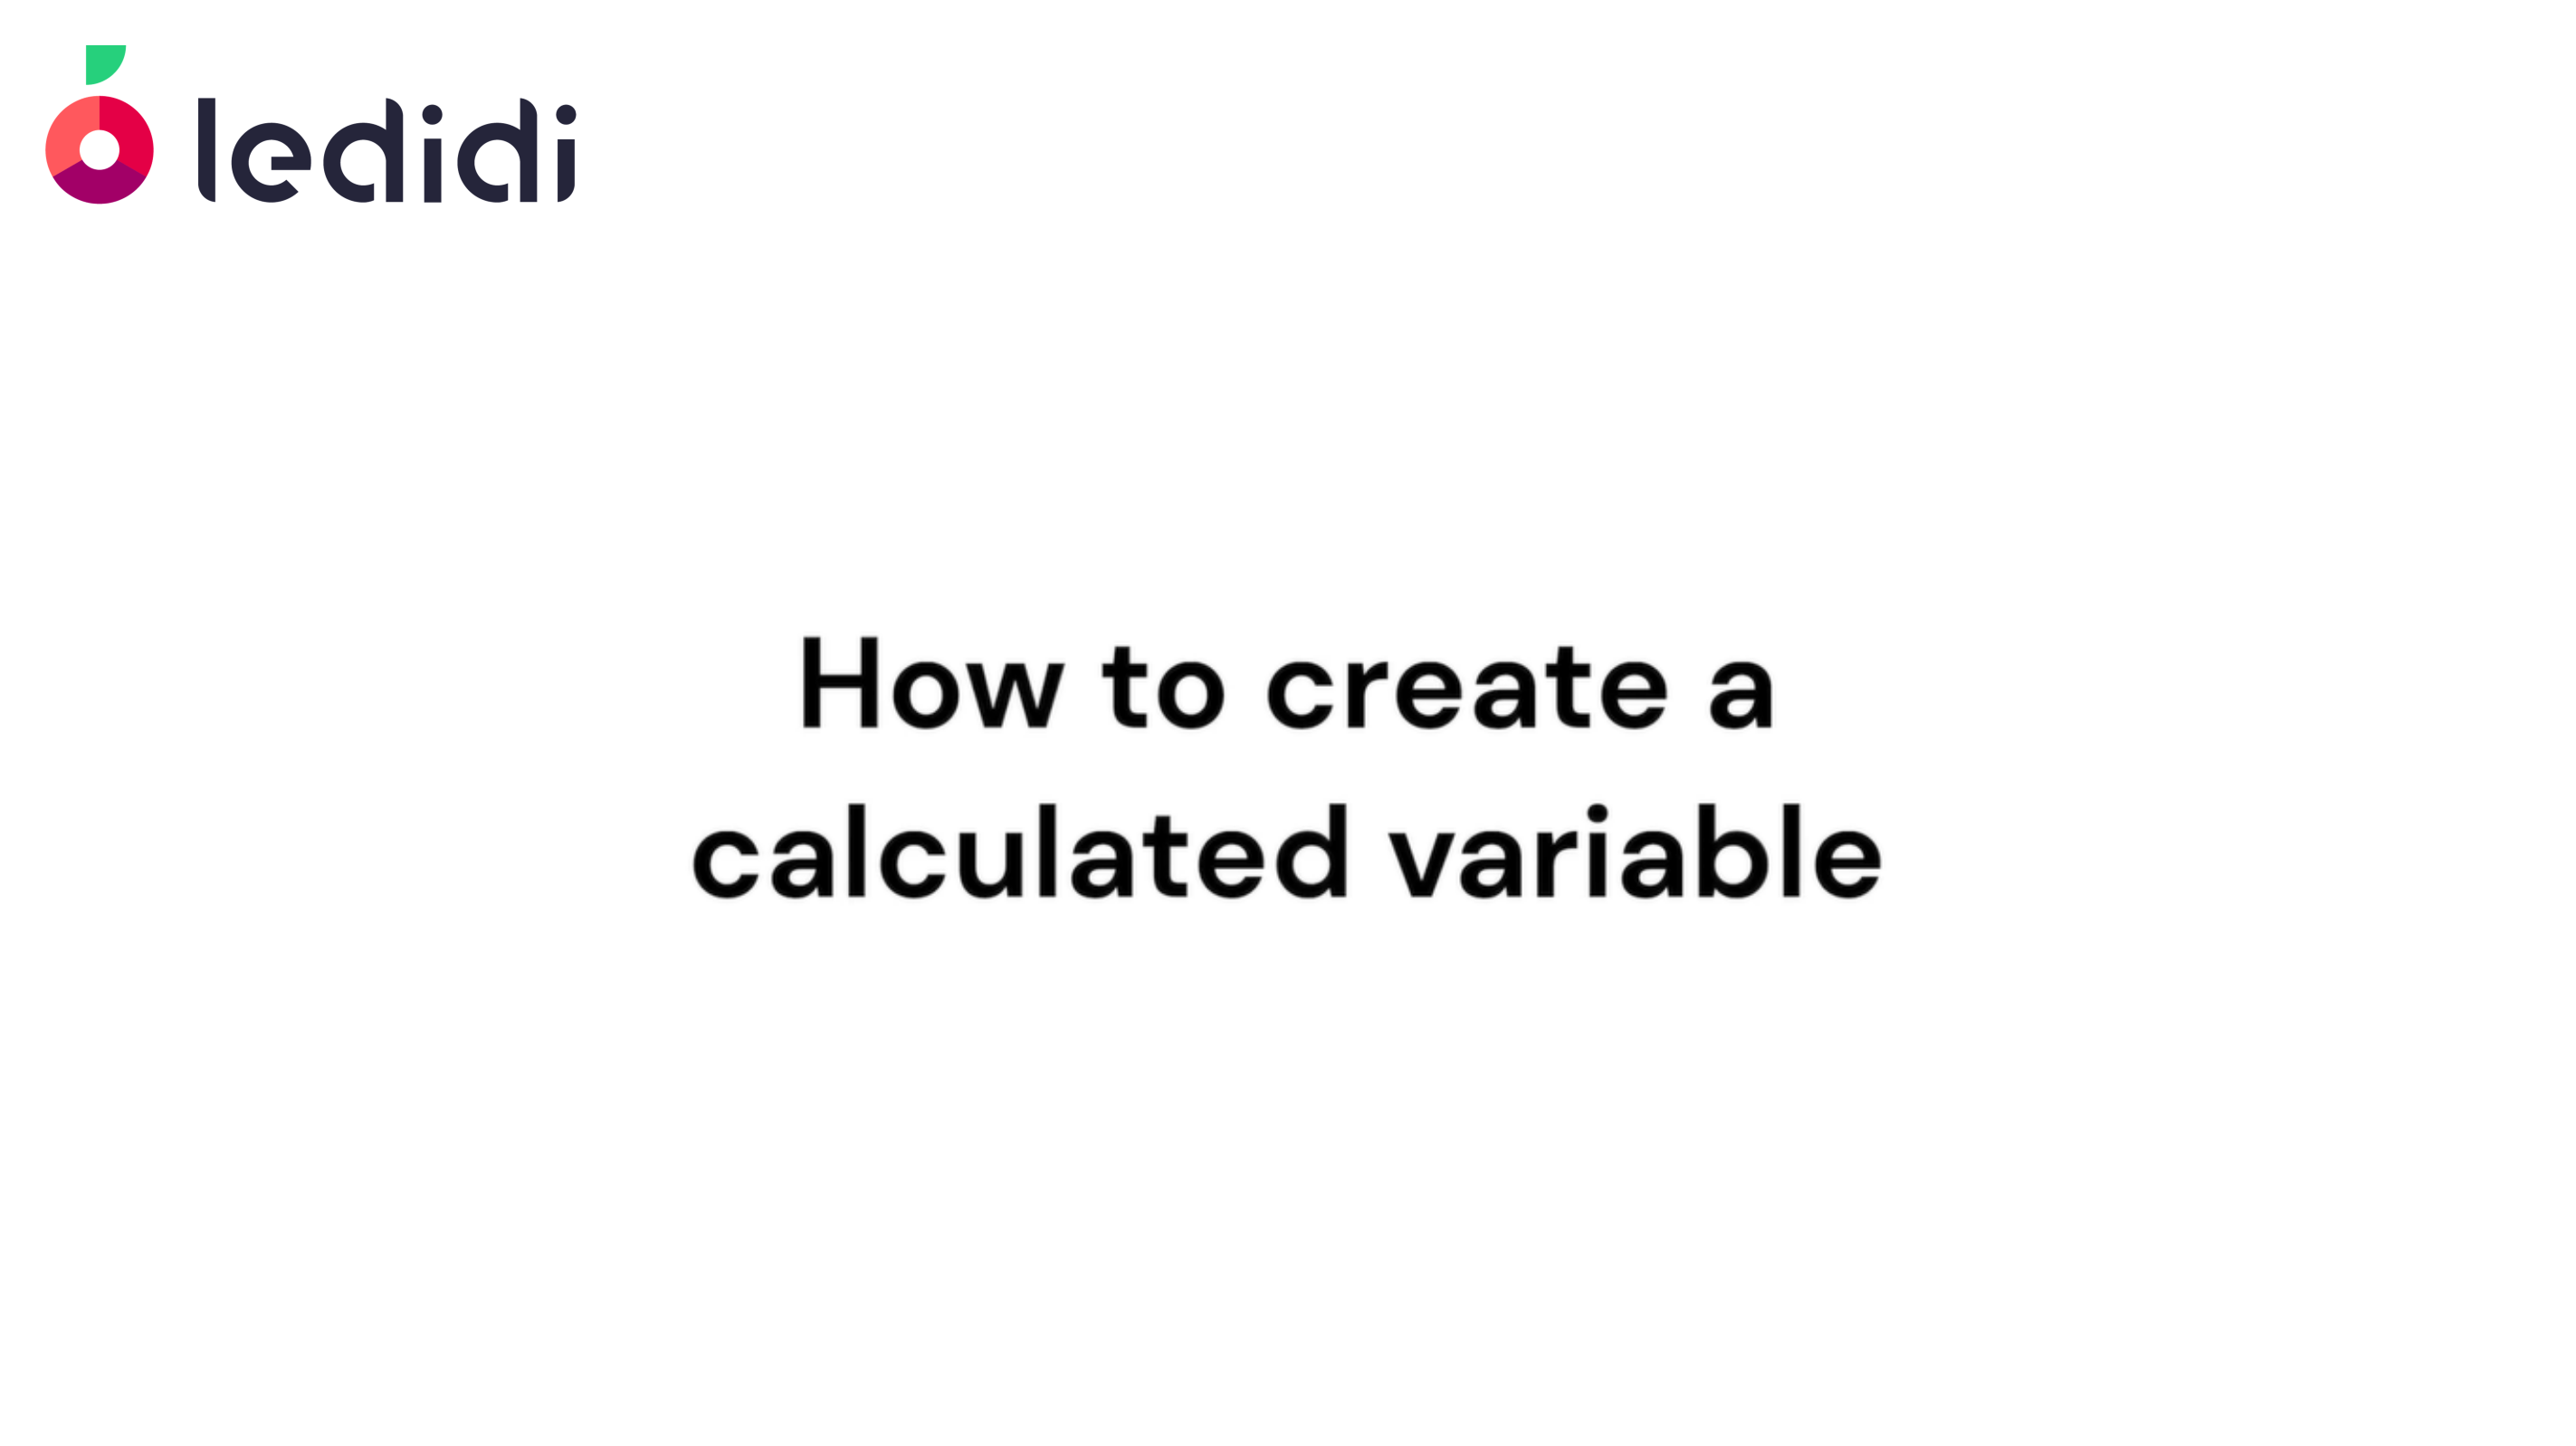 How to create a calculated variable